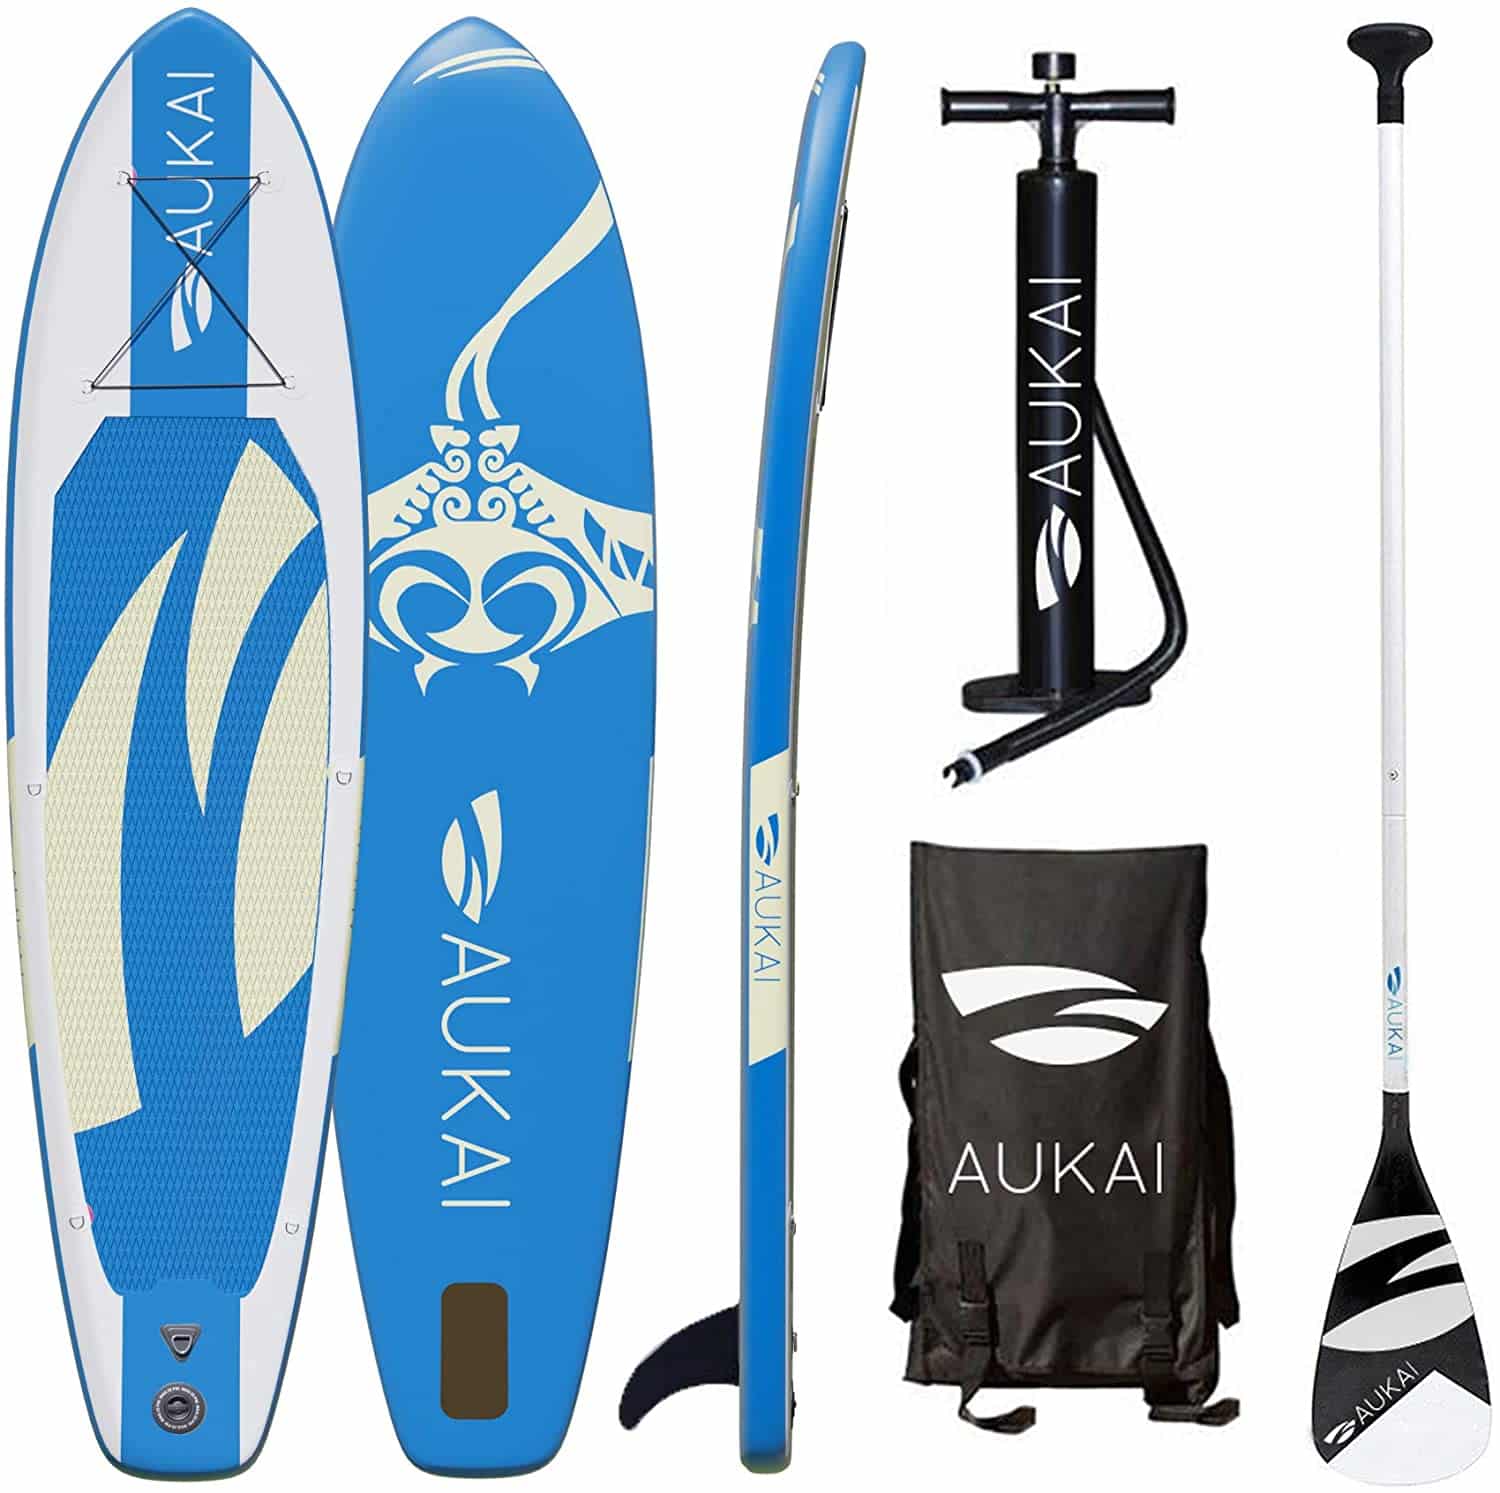 Aukai SUP Surfboard 320 cm Manta Stand Up Paddle Board Inflatable